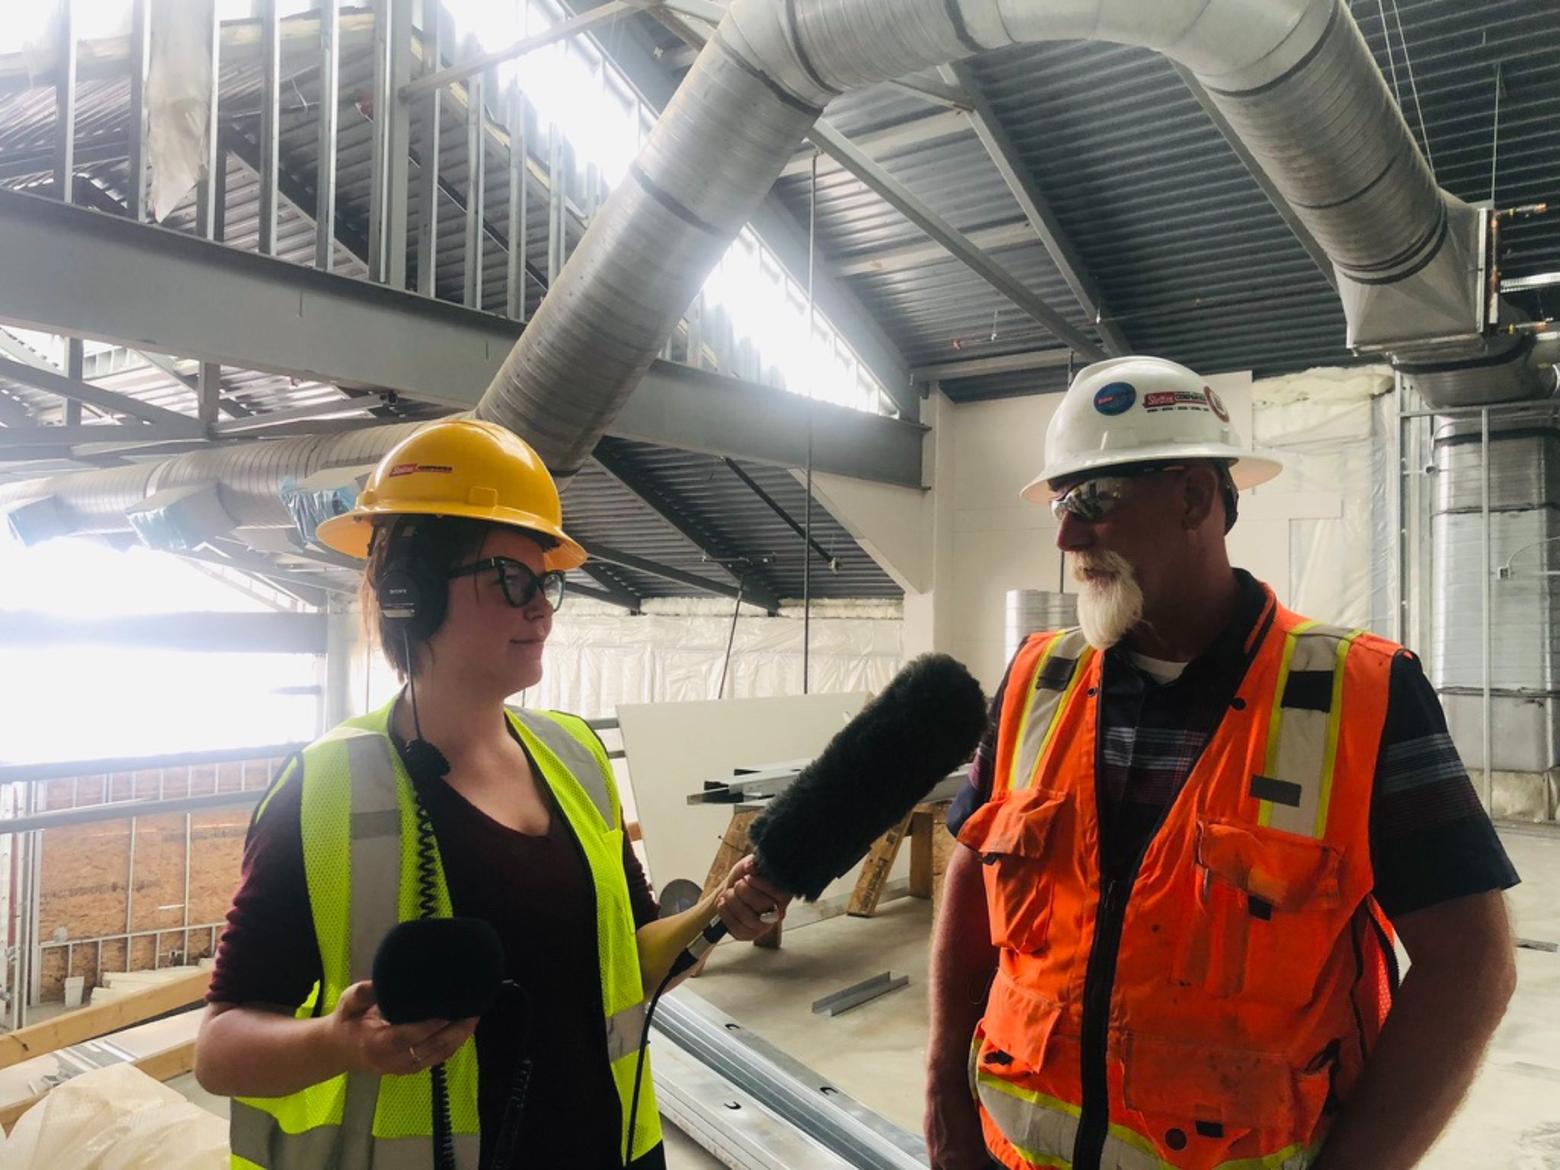 A reporter in the field of Indian Country: Taylar Stagnar visits the new Wellness Center being built at Poplar, Montana on the Fort Peck Reservation. Photo courtesy Taylar Stagner 